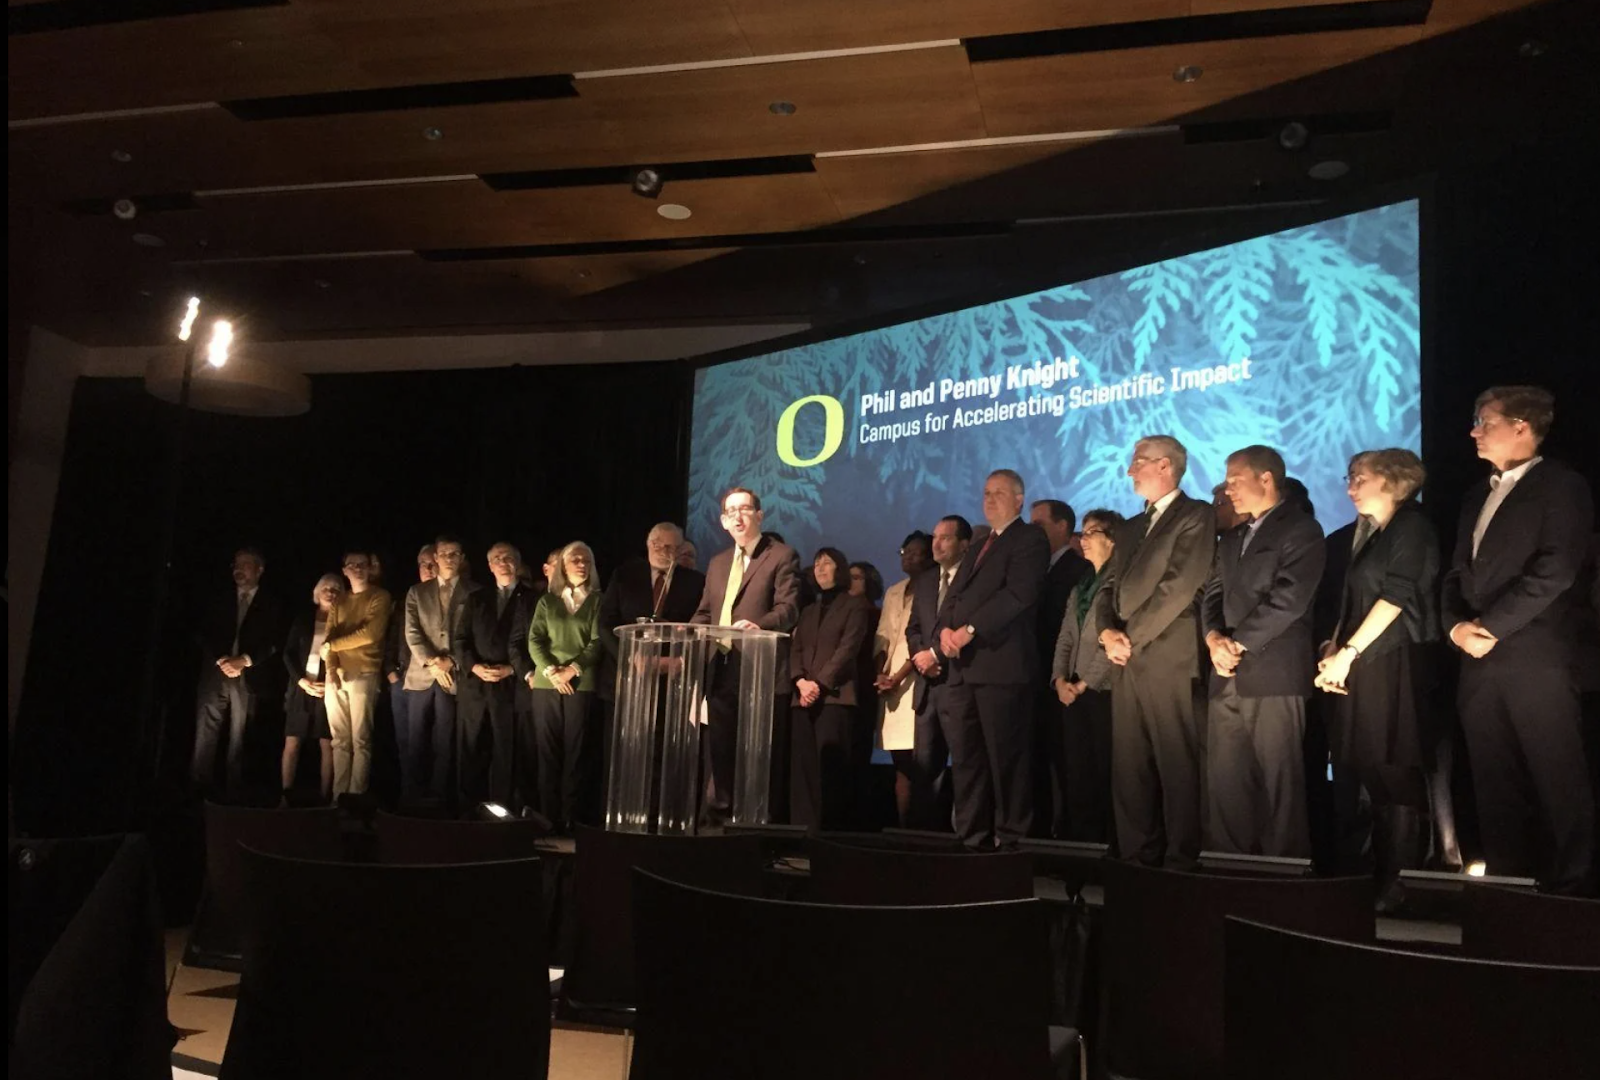 Schill stands before a podium on stage at the University of Oregon, surrounded by faculty members and other stakeholders.